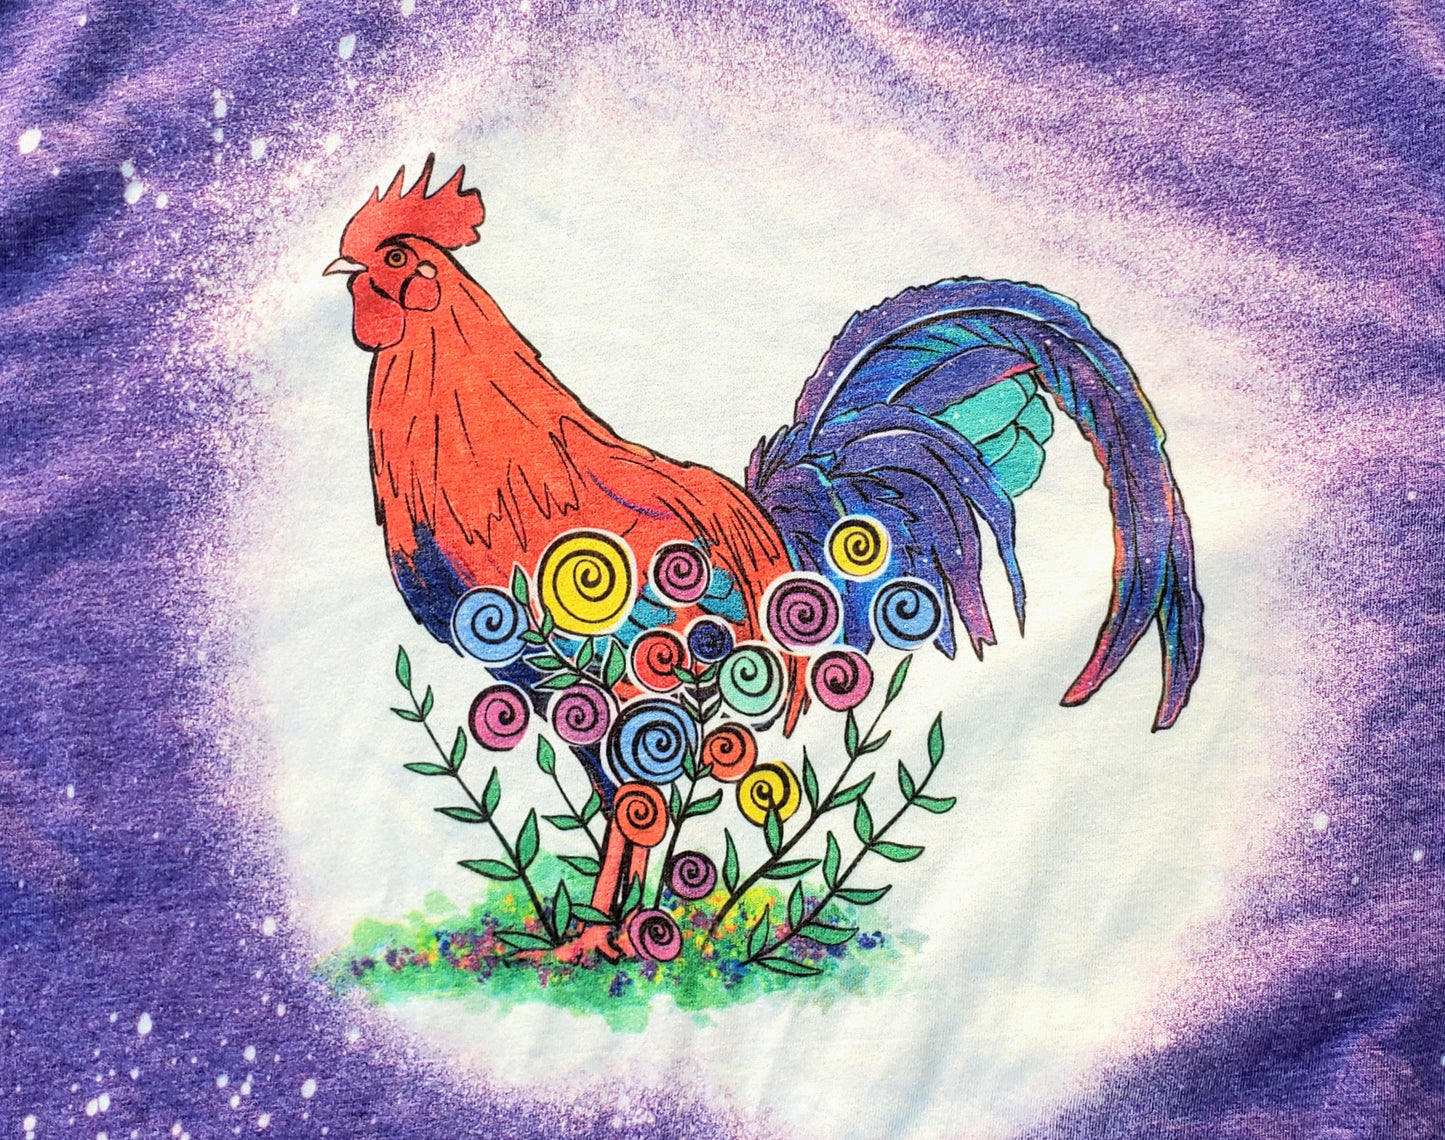 Rooster Purple Bleached T-Shirt